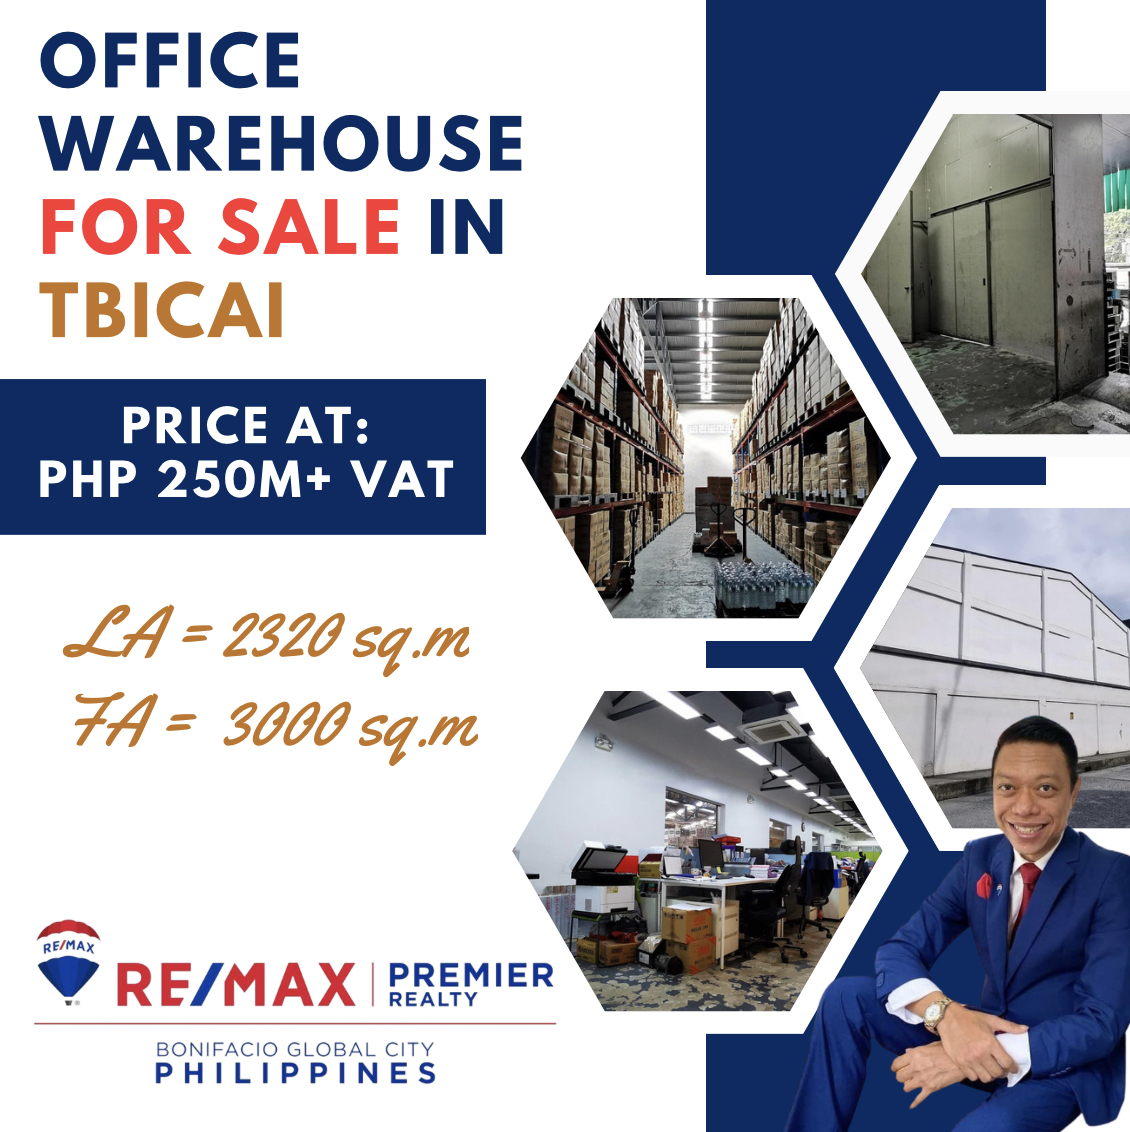 OFFICE WAREHOUSE FOR SALE in TBICAI, Brgy. Bagumbayan, Taguig‼️